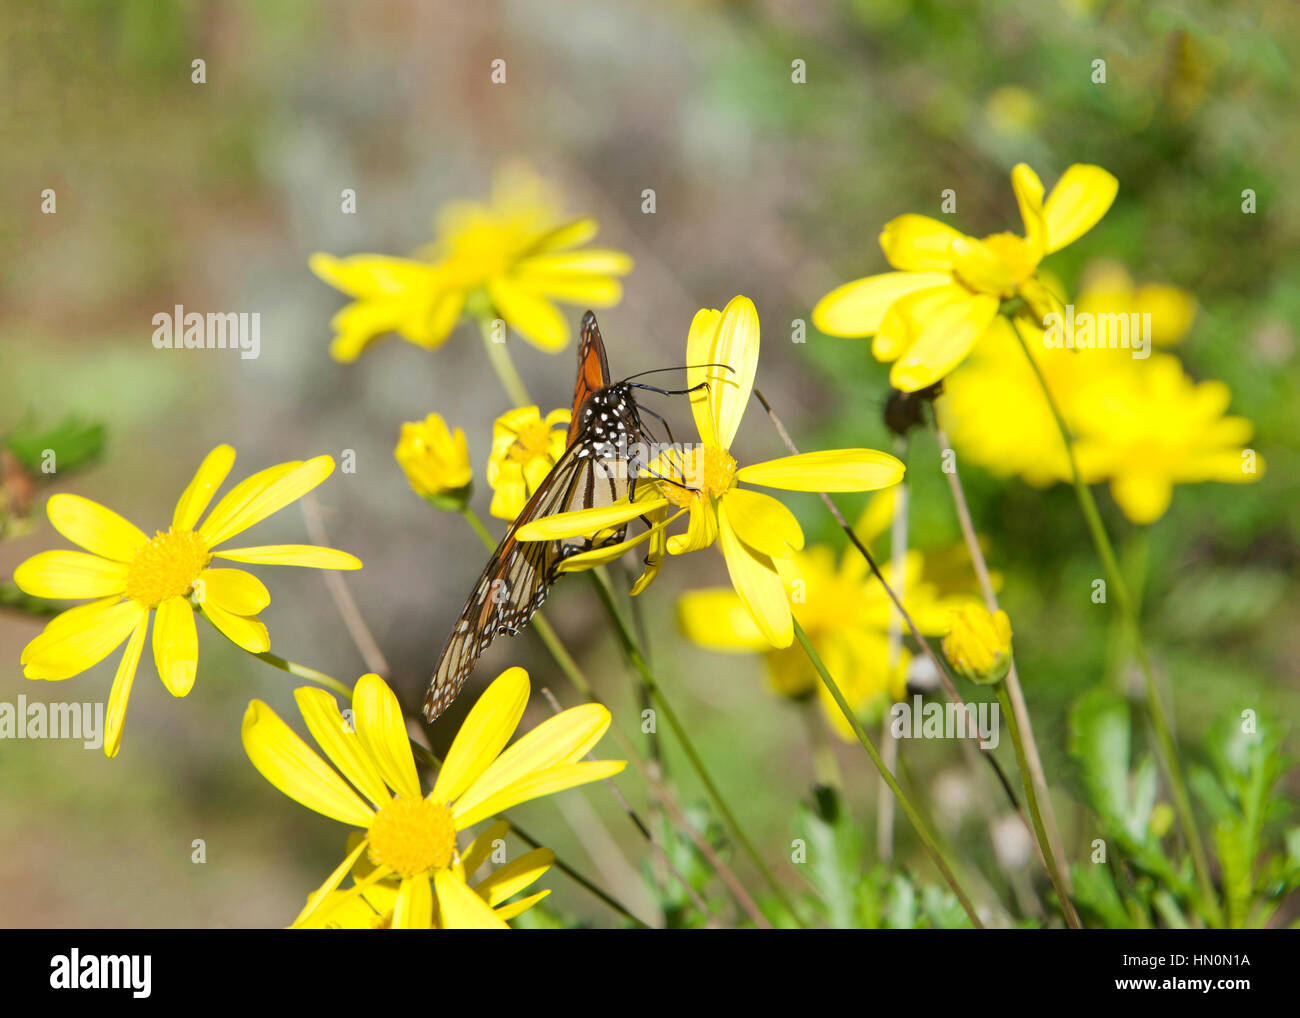 Monarch butterfly on yellow daisy flowers, the monarch butterfly is possibly the most familiar North American butterfly, and is considered an iconic p Stock Photo